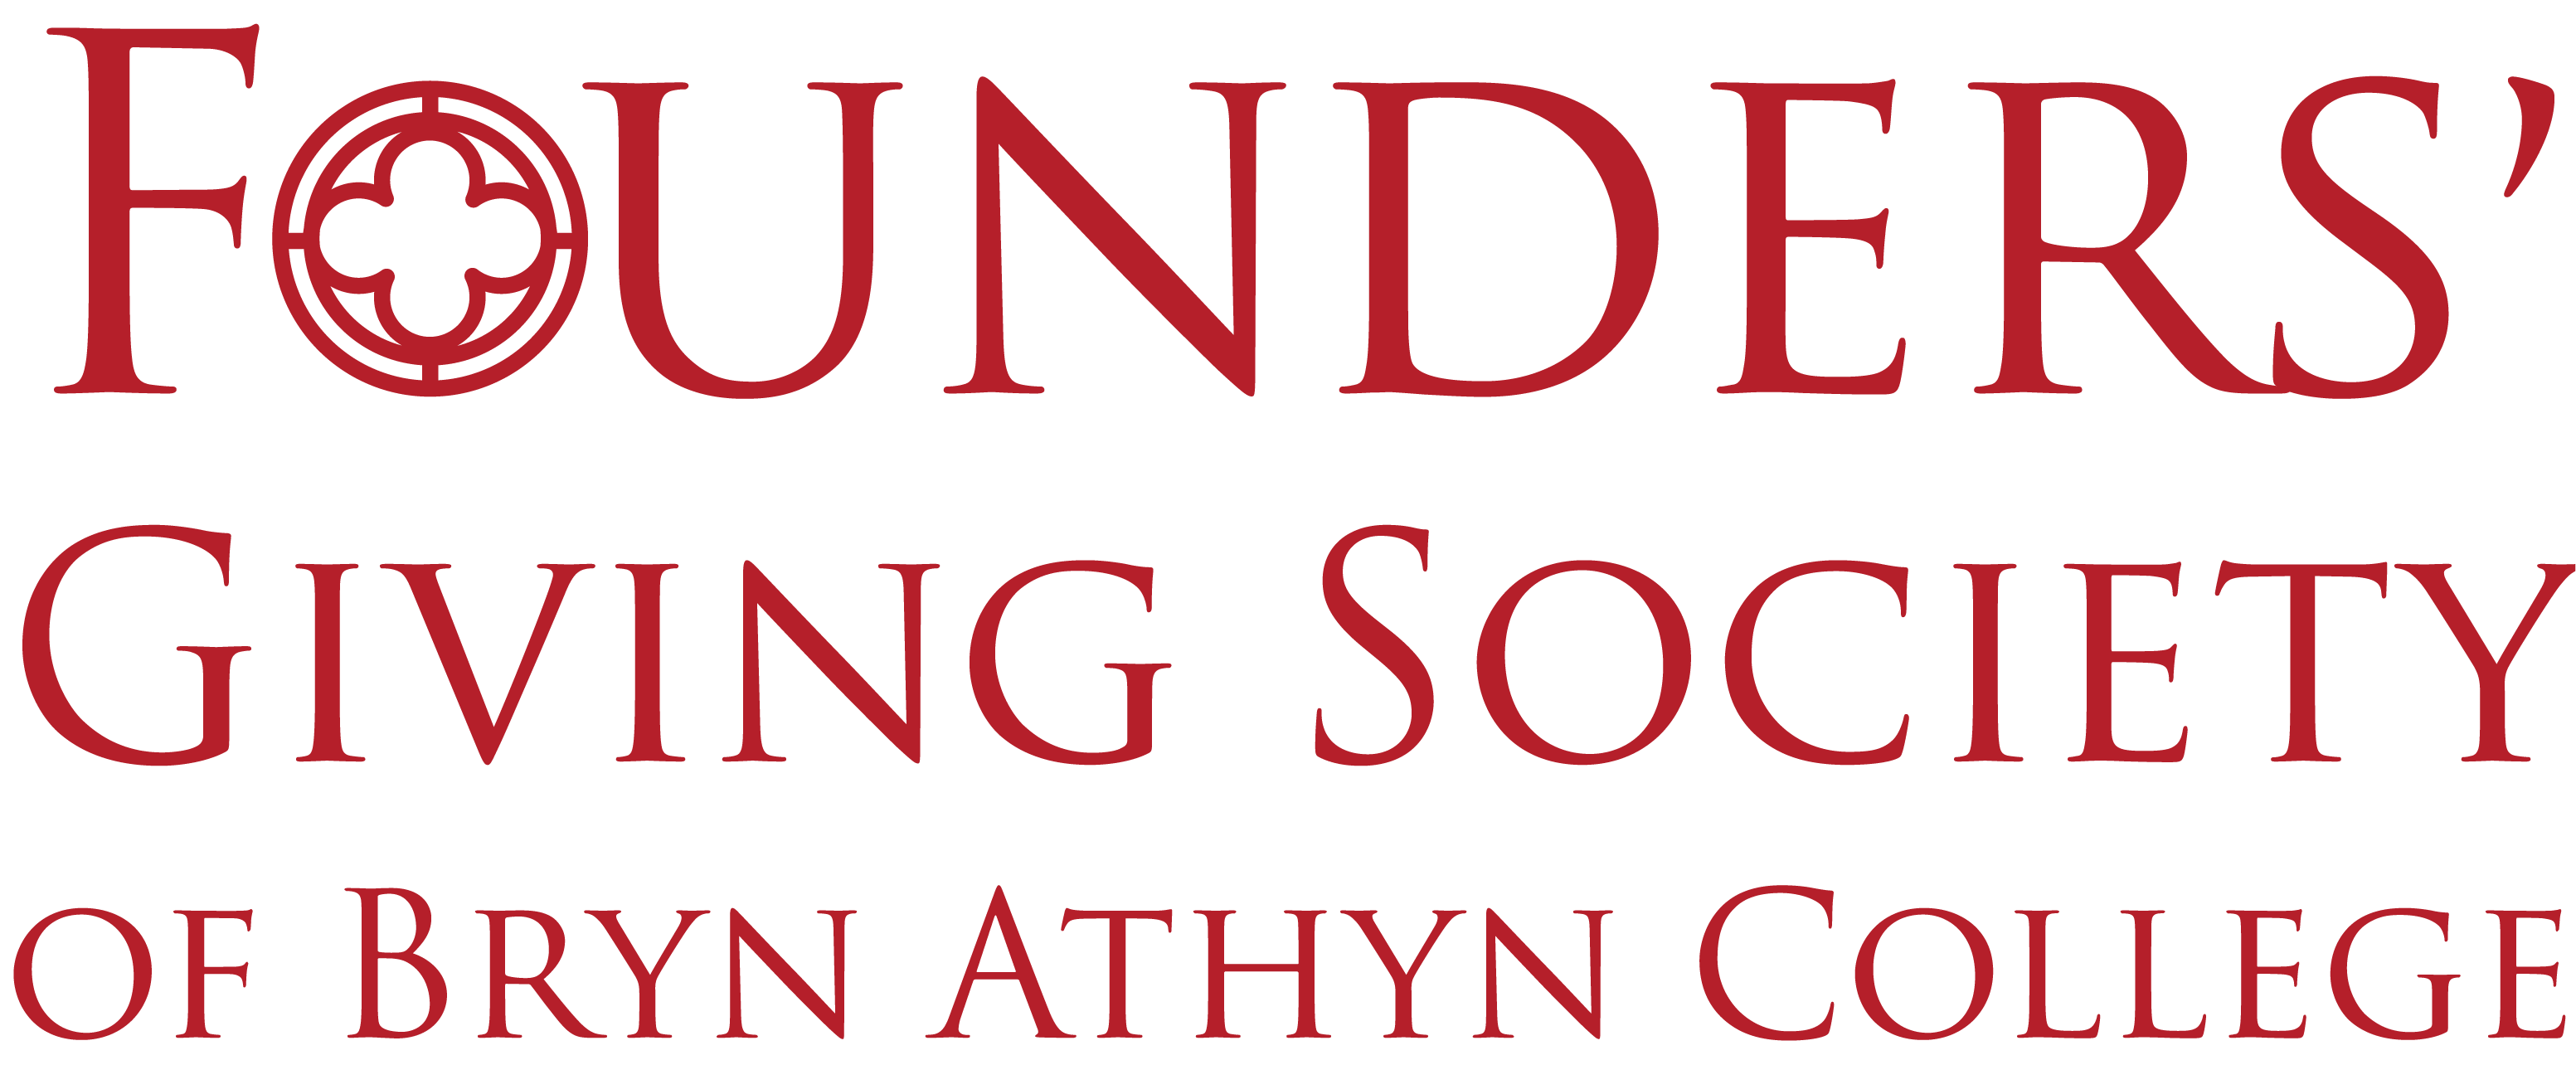 Founder's Giving Society at Bryn Athyn College